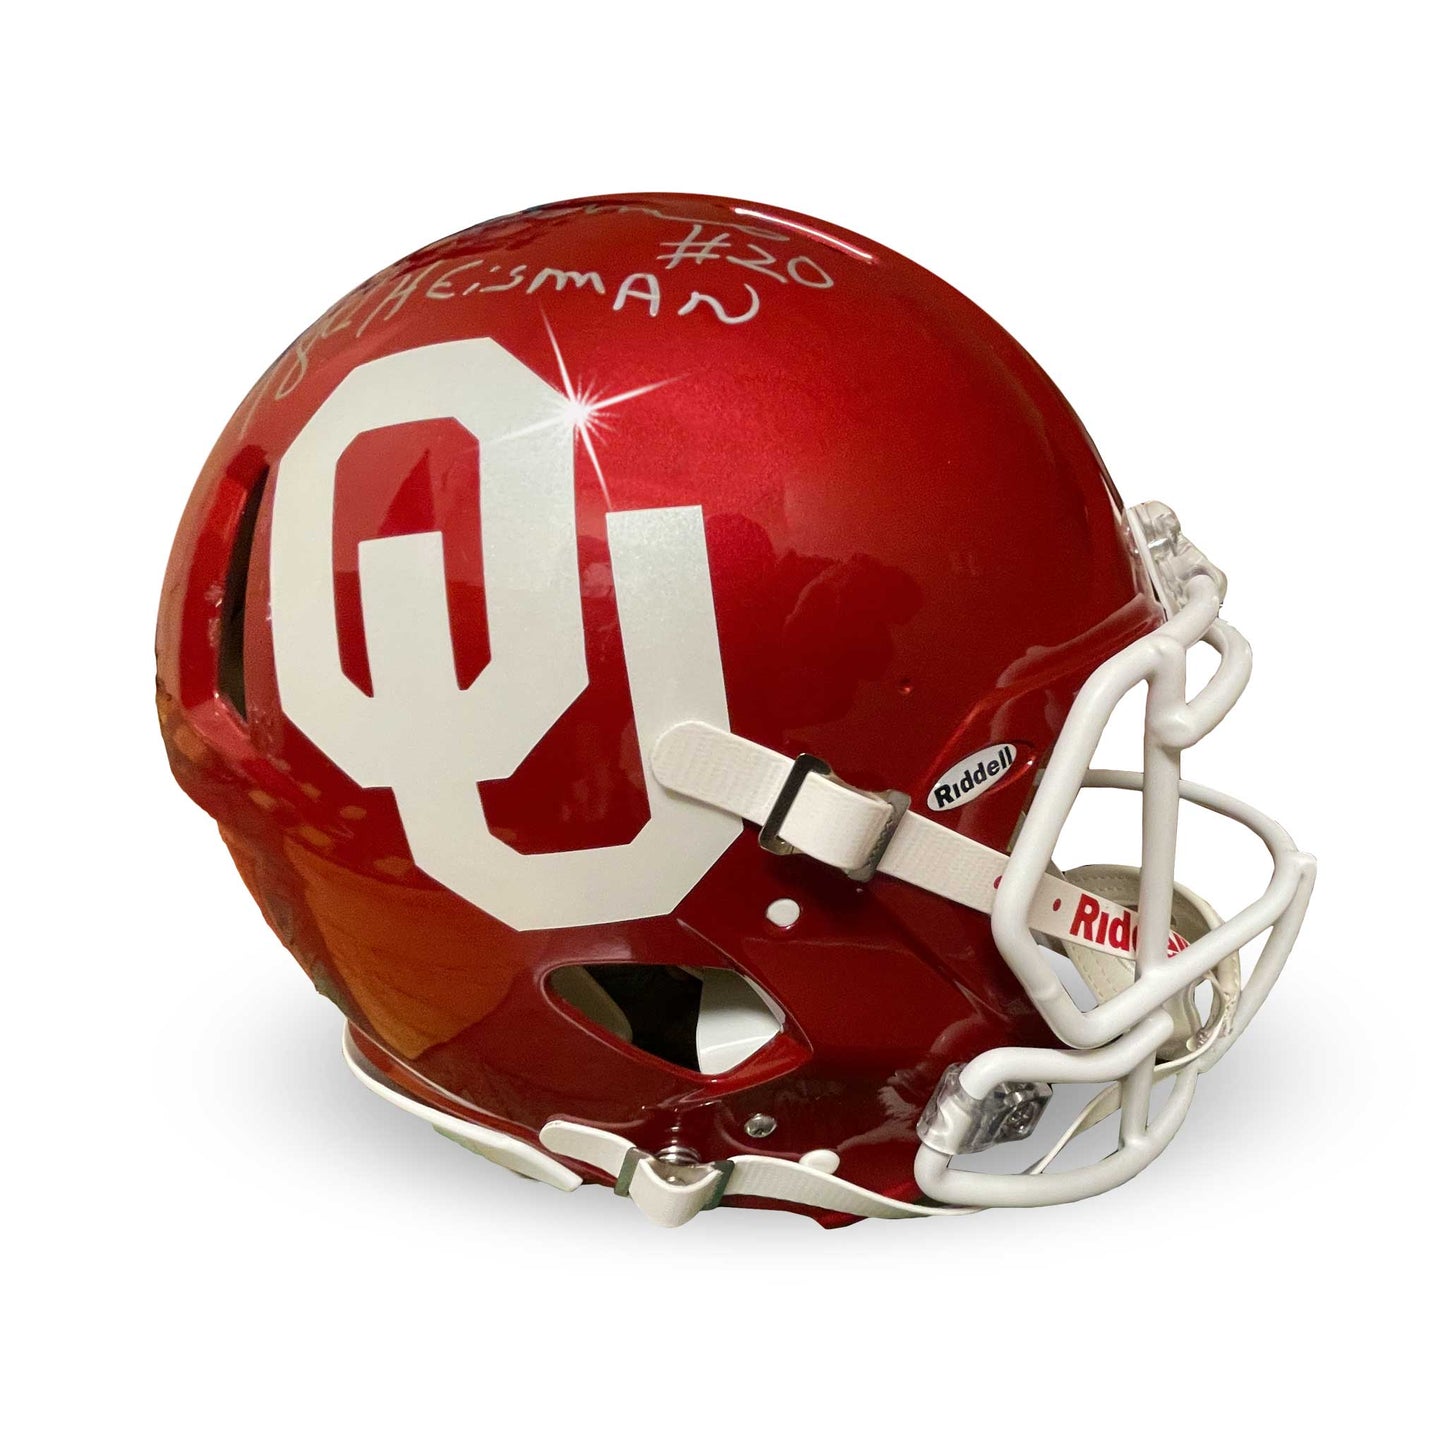 Full-Size Replica OU Helmet Signed By Billy Sims